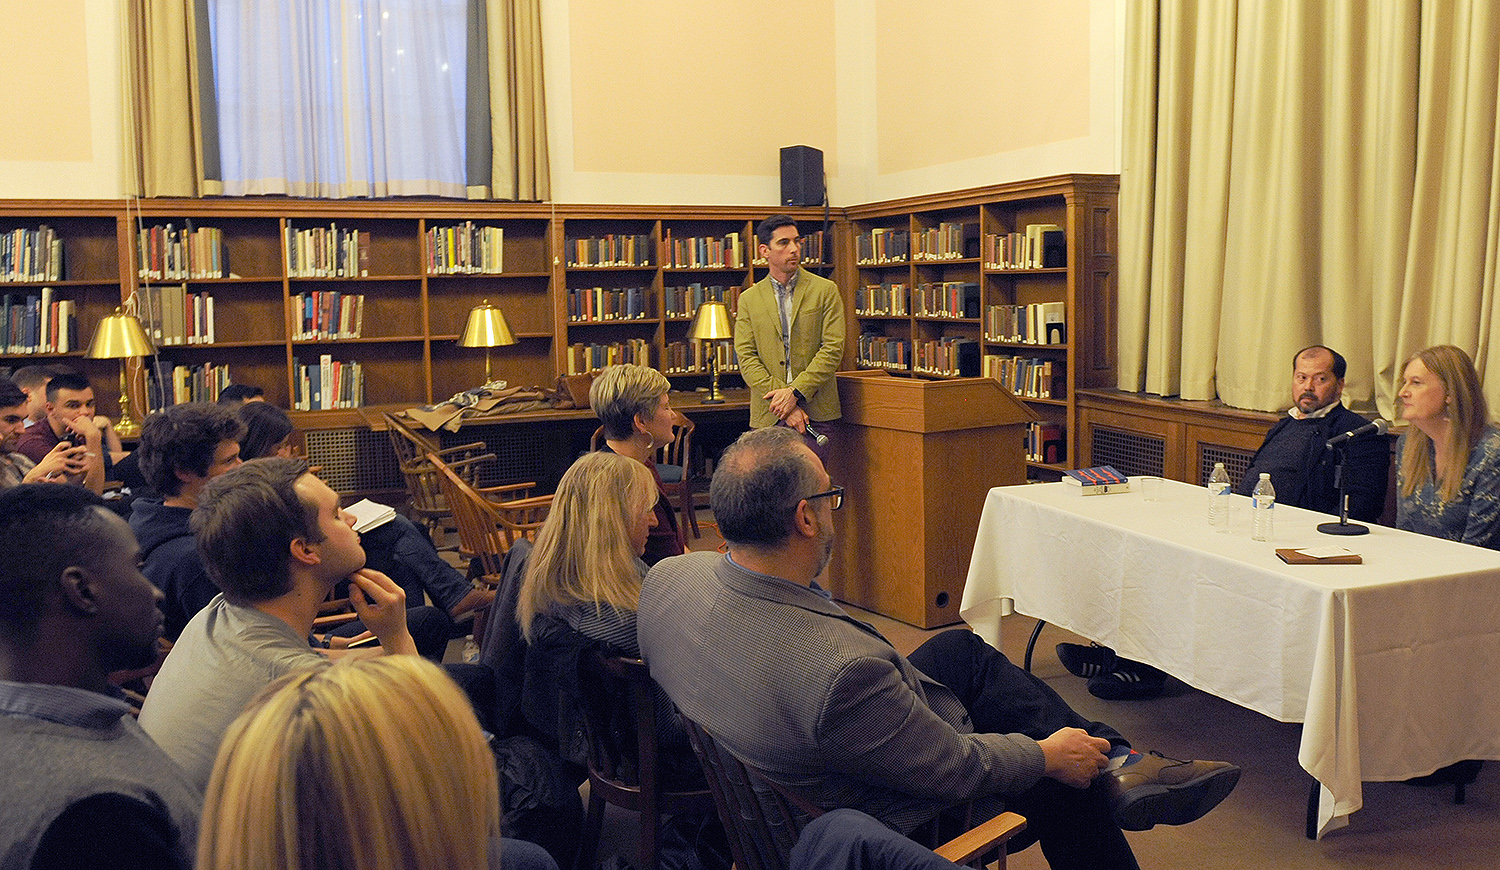 On March 3, the Friends of the Wesleyan Library hosted a talk titled “Queer Past, Queer Future" in the Smith Reading Room.